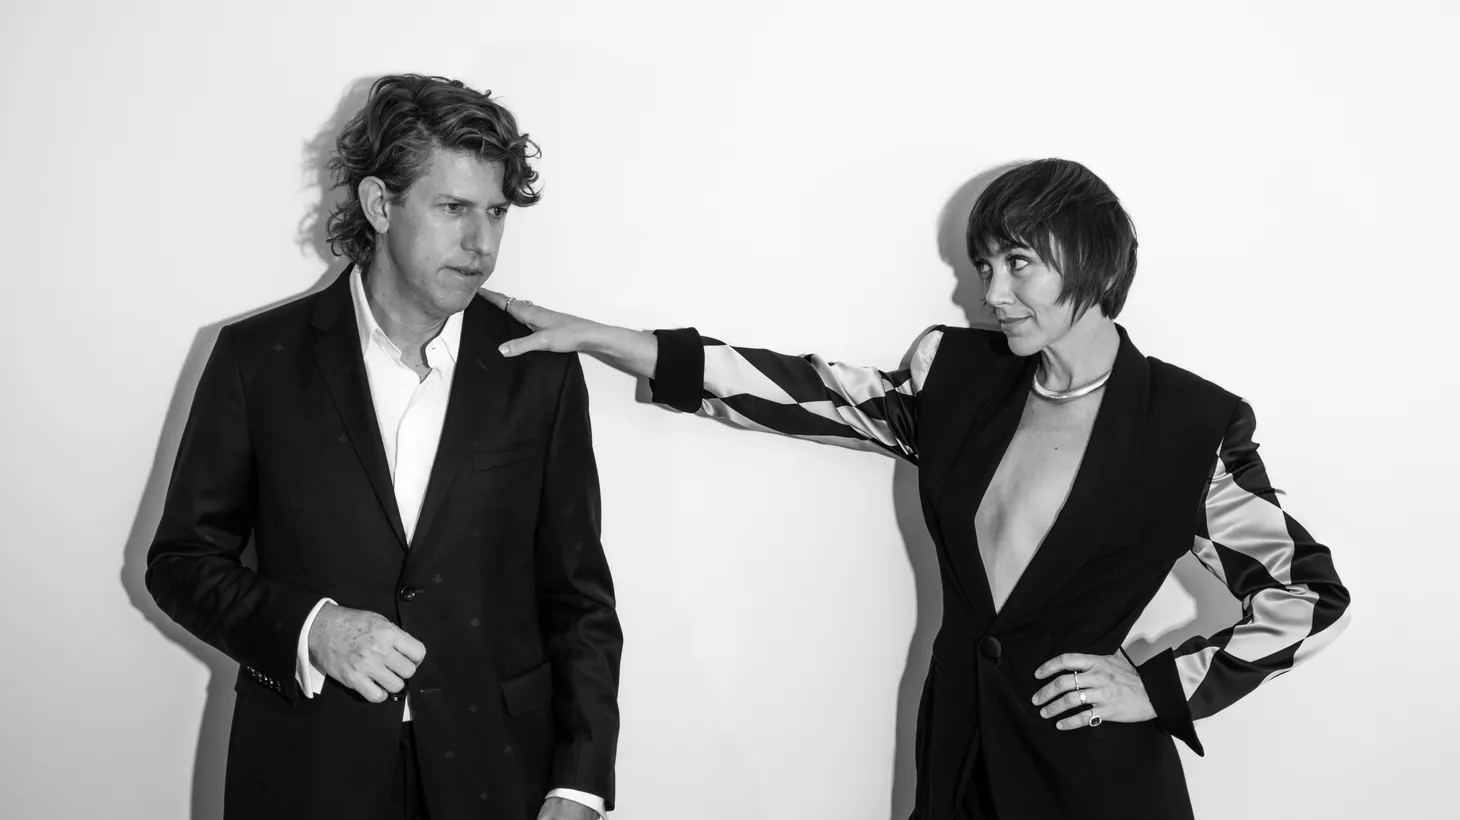 Greg Kurstin and Inara George, a.k.a. the bird and the bee, were scheduled to meet up to write songs on the day Queen Elizabeth passed.